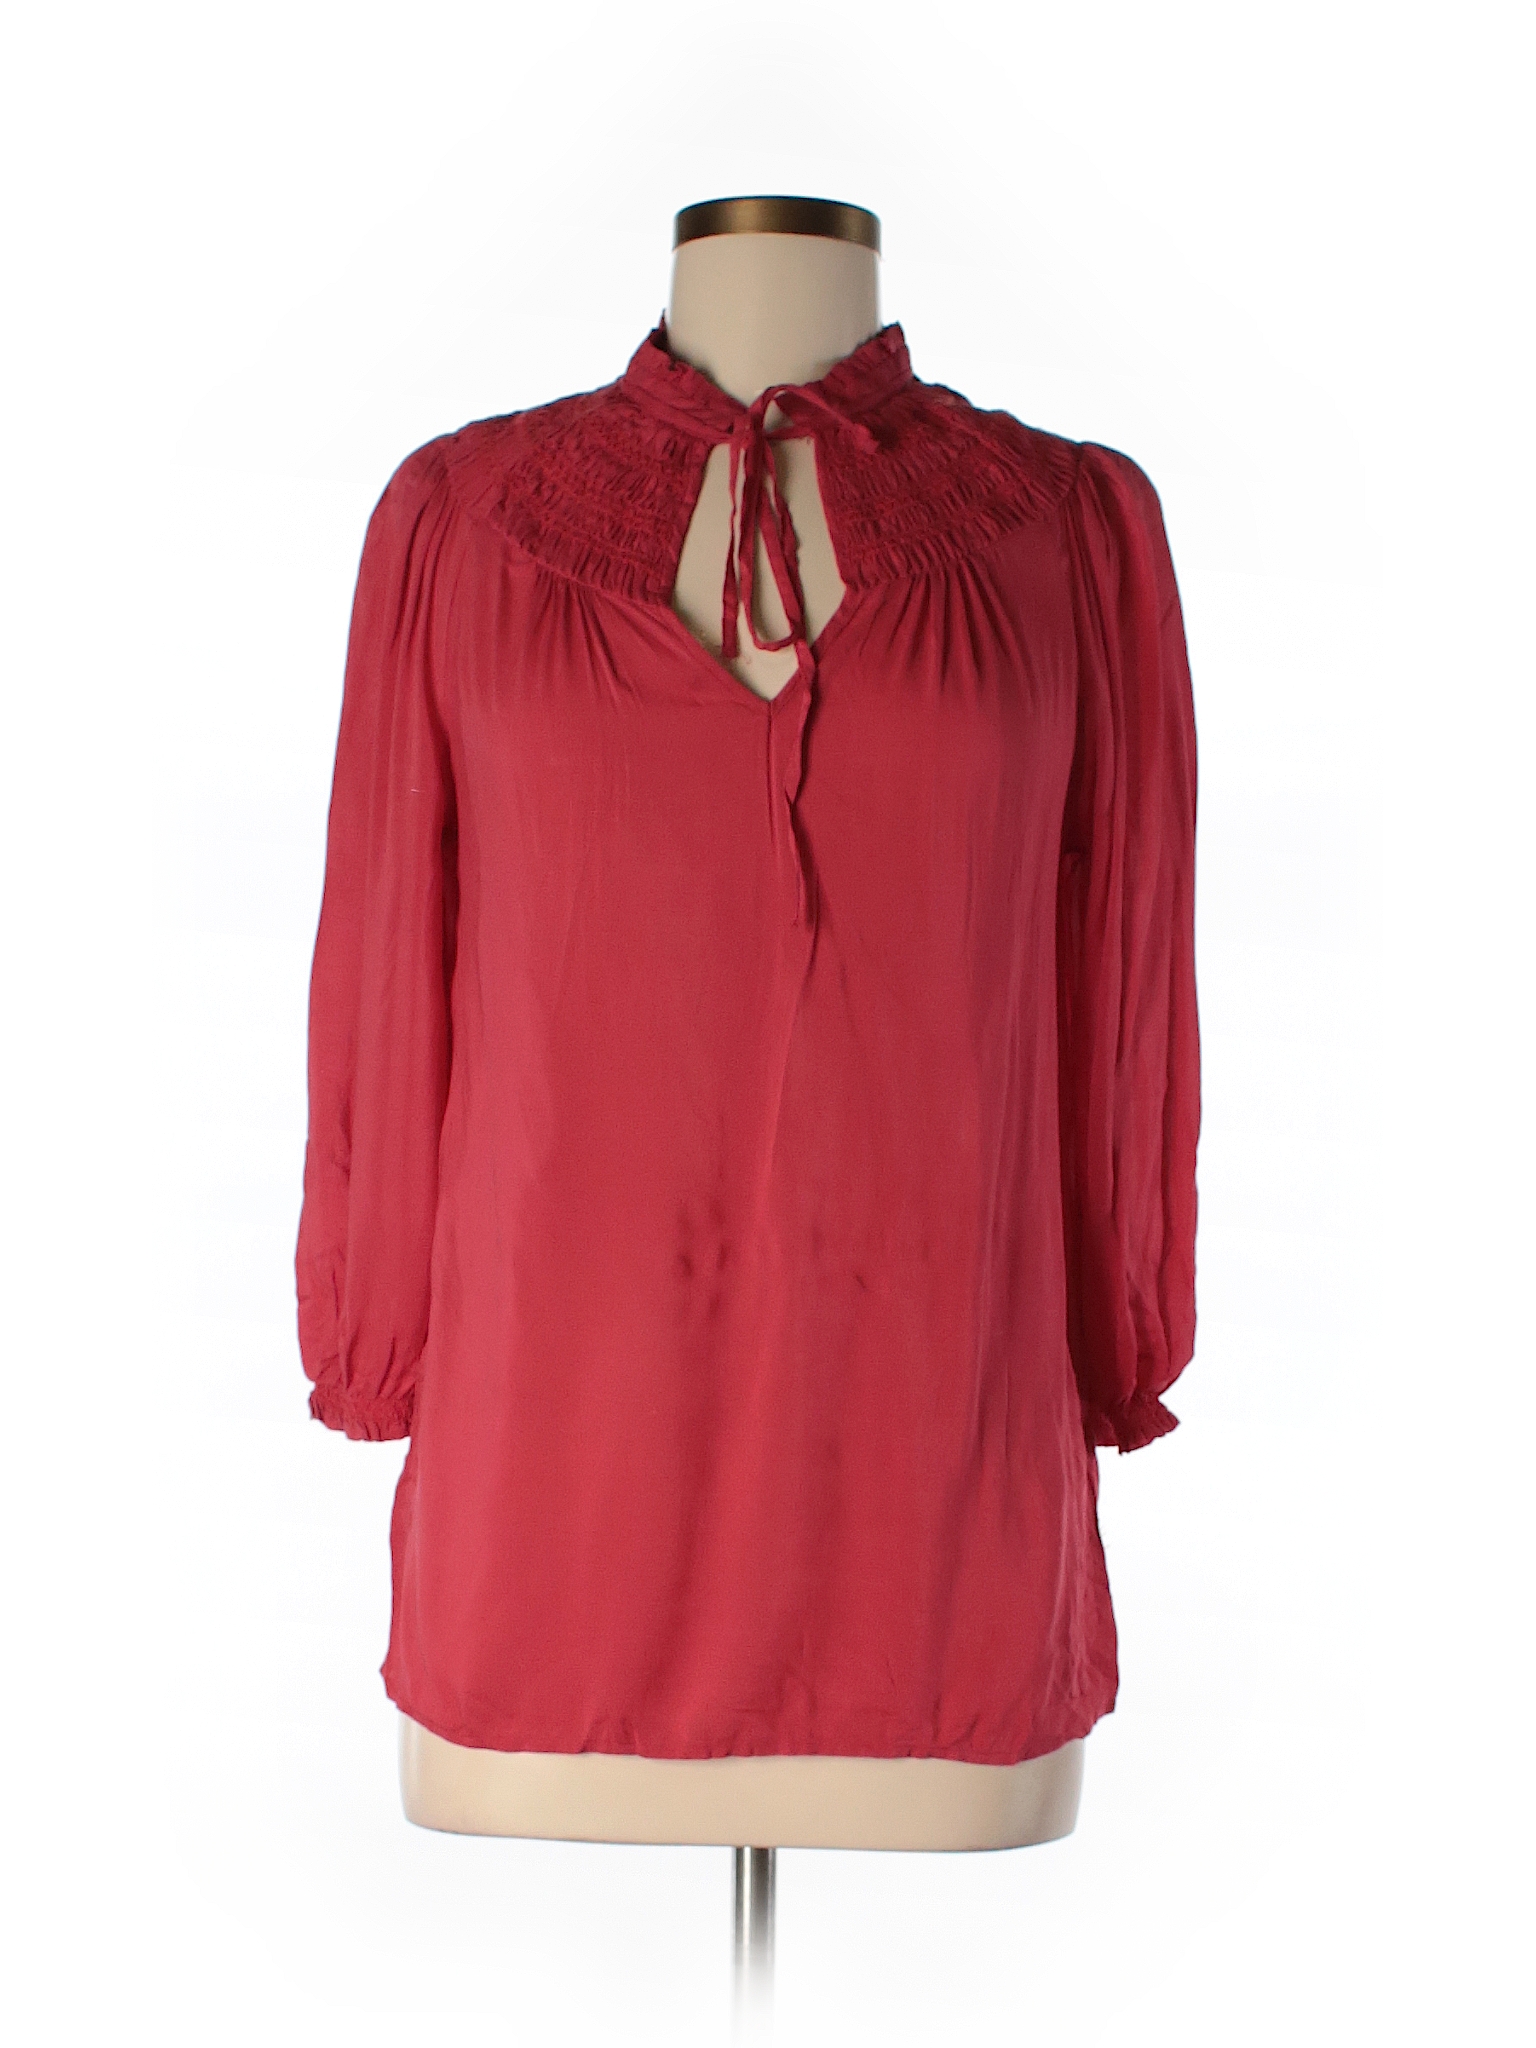 Joie 100% Rayon Solid Red 3/4 Sleeve Blouse Size 4 - 97% off | thredUP